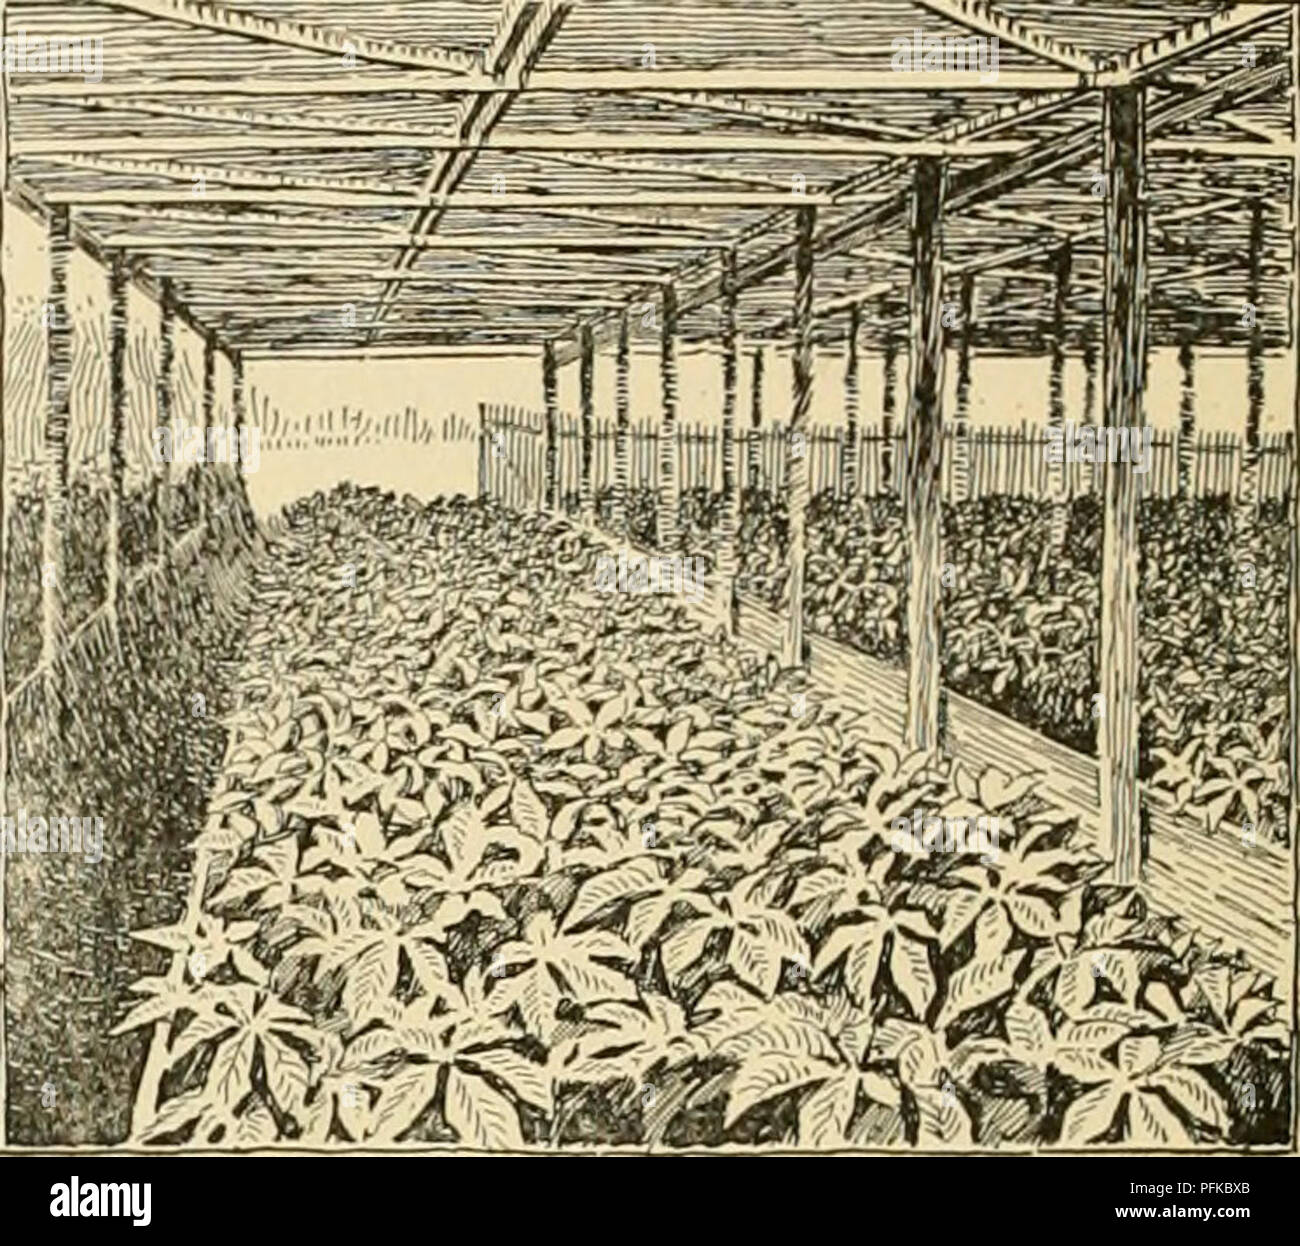 . Cyclopedia of farm crops. Farm produce; Agriculture. Fig. 509. A ginseng arbor with seed-beds. top shade, the laths may be woven with galvanized wire with a common fence-weaving machine, and will be found cheap and practicable. The writer has used this style of shading to a considerable. Fig. 510. Ginseng arbor with mature plants. and with this style of shading this difficulty is overcome almost entirely. Enemies. Wilt.—The older ginseng plants are subject to a wilt-disease, from a fungus belonging to the genus Acrostalagmus. The leaves lose their turgidity and droop down against the stalk,  Stock Photo